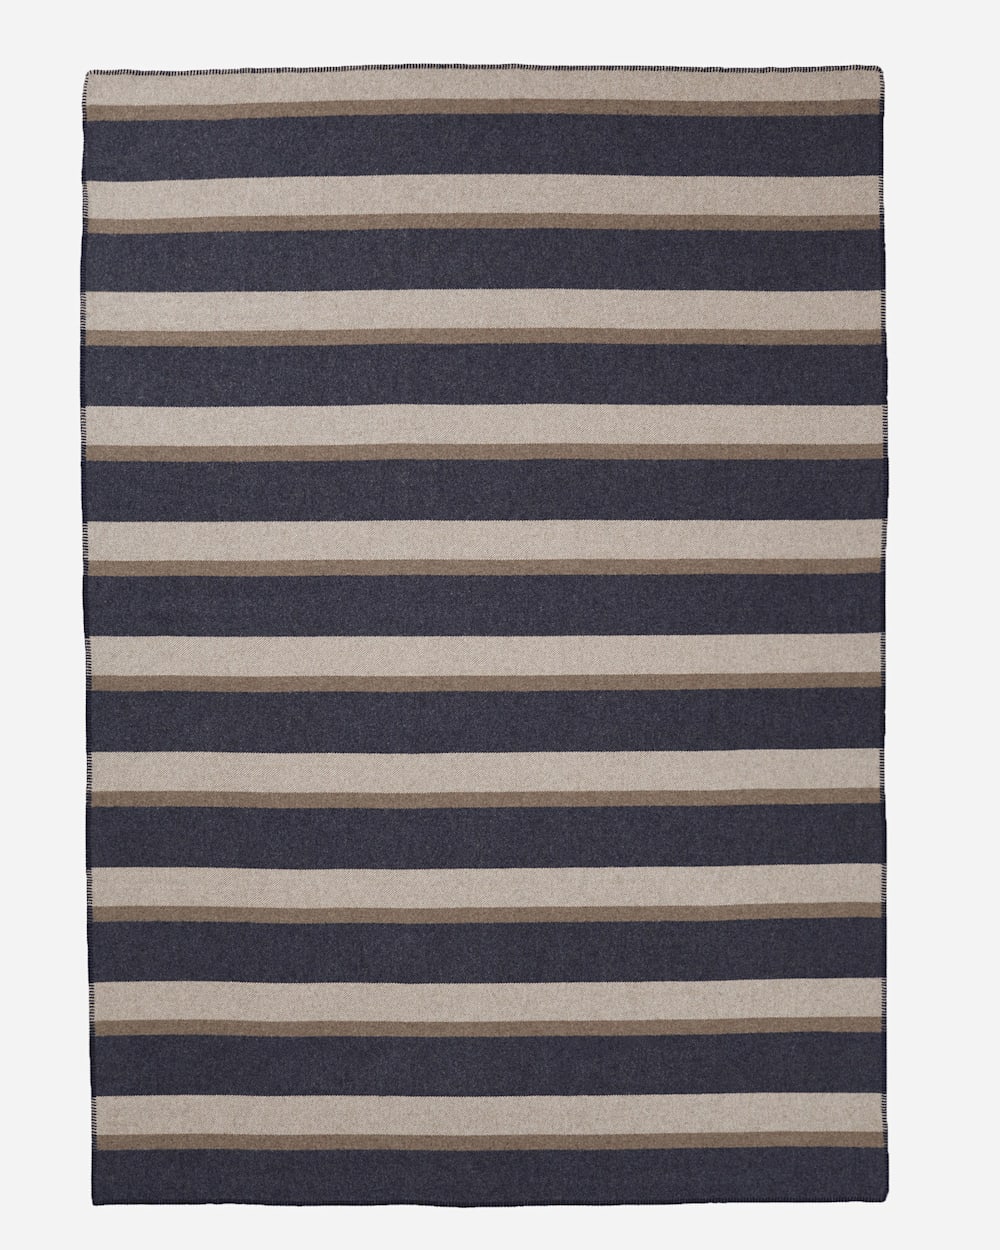 ECO-WISE WOOL PLAID/STRIPE BLANKET IN MIDNIGHT NAVY STRIPE LAYING FLAT image number 2